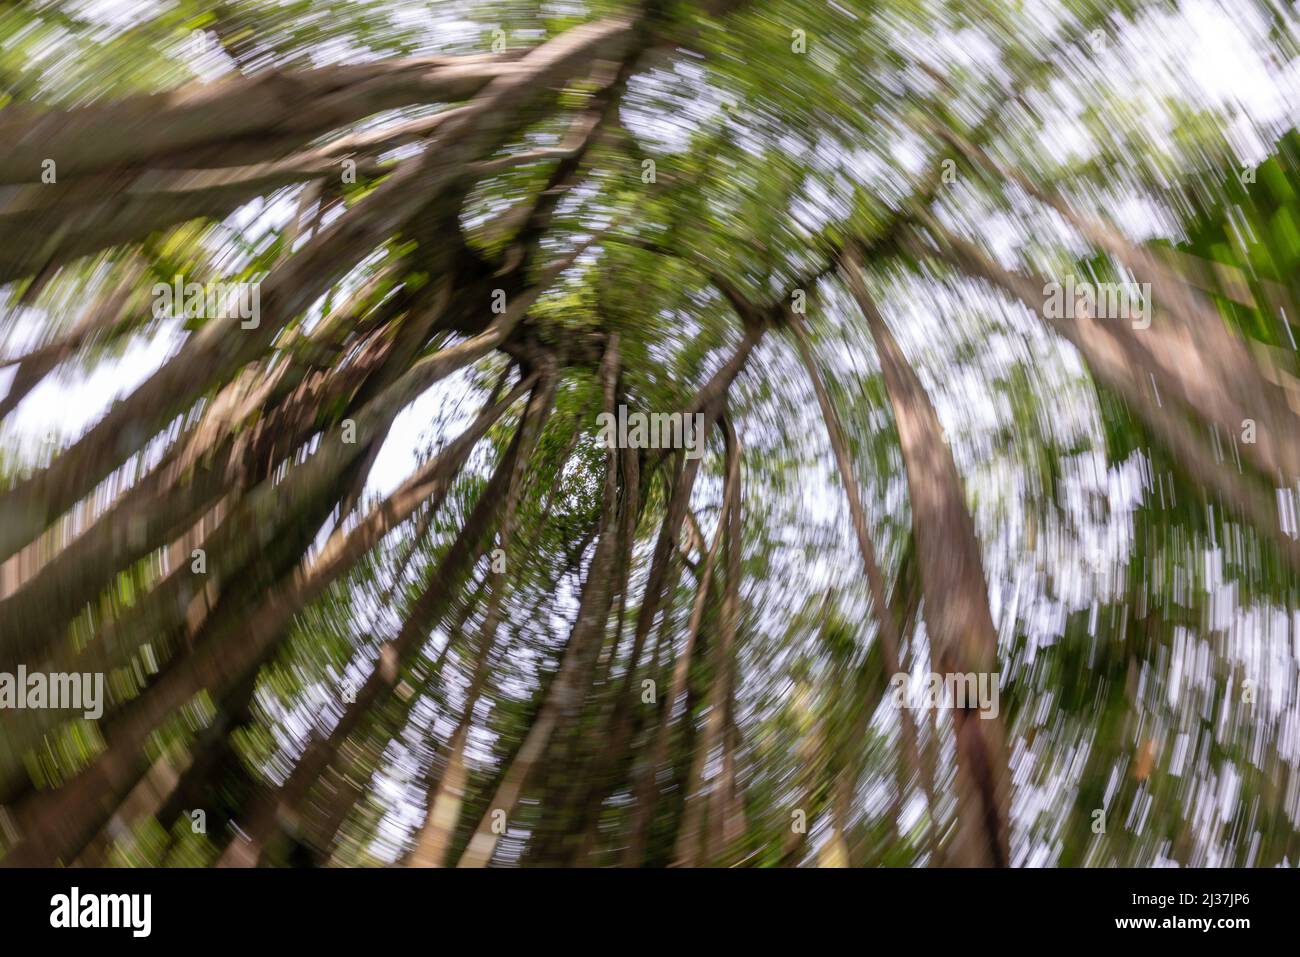 Spinning blur effect at Malaysia rainforest. Blur image due to rotation camera while shooting. Stock Photo